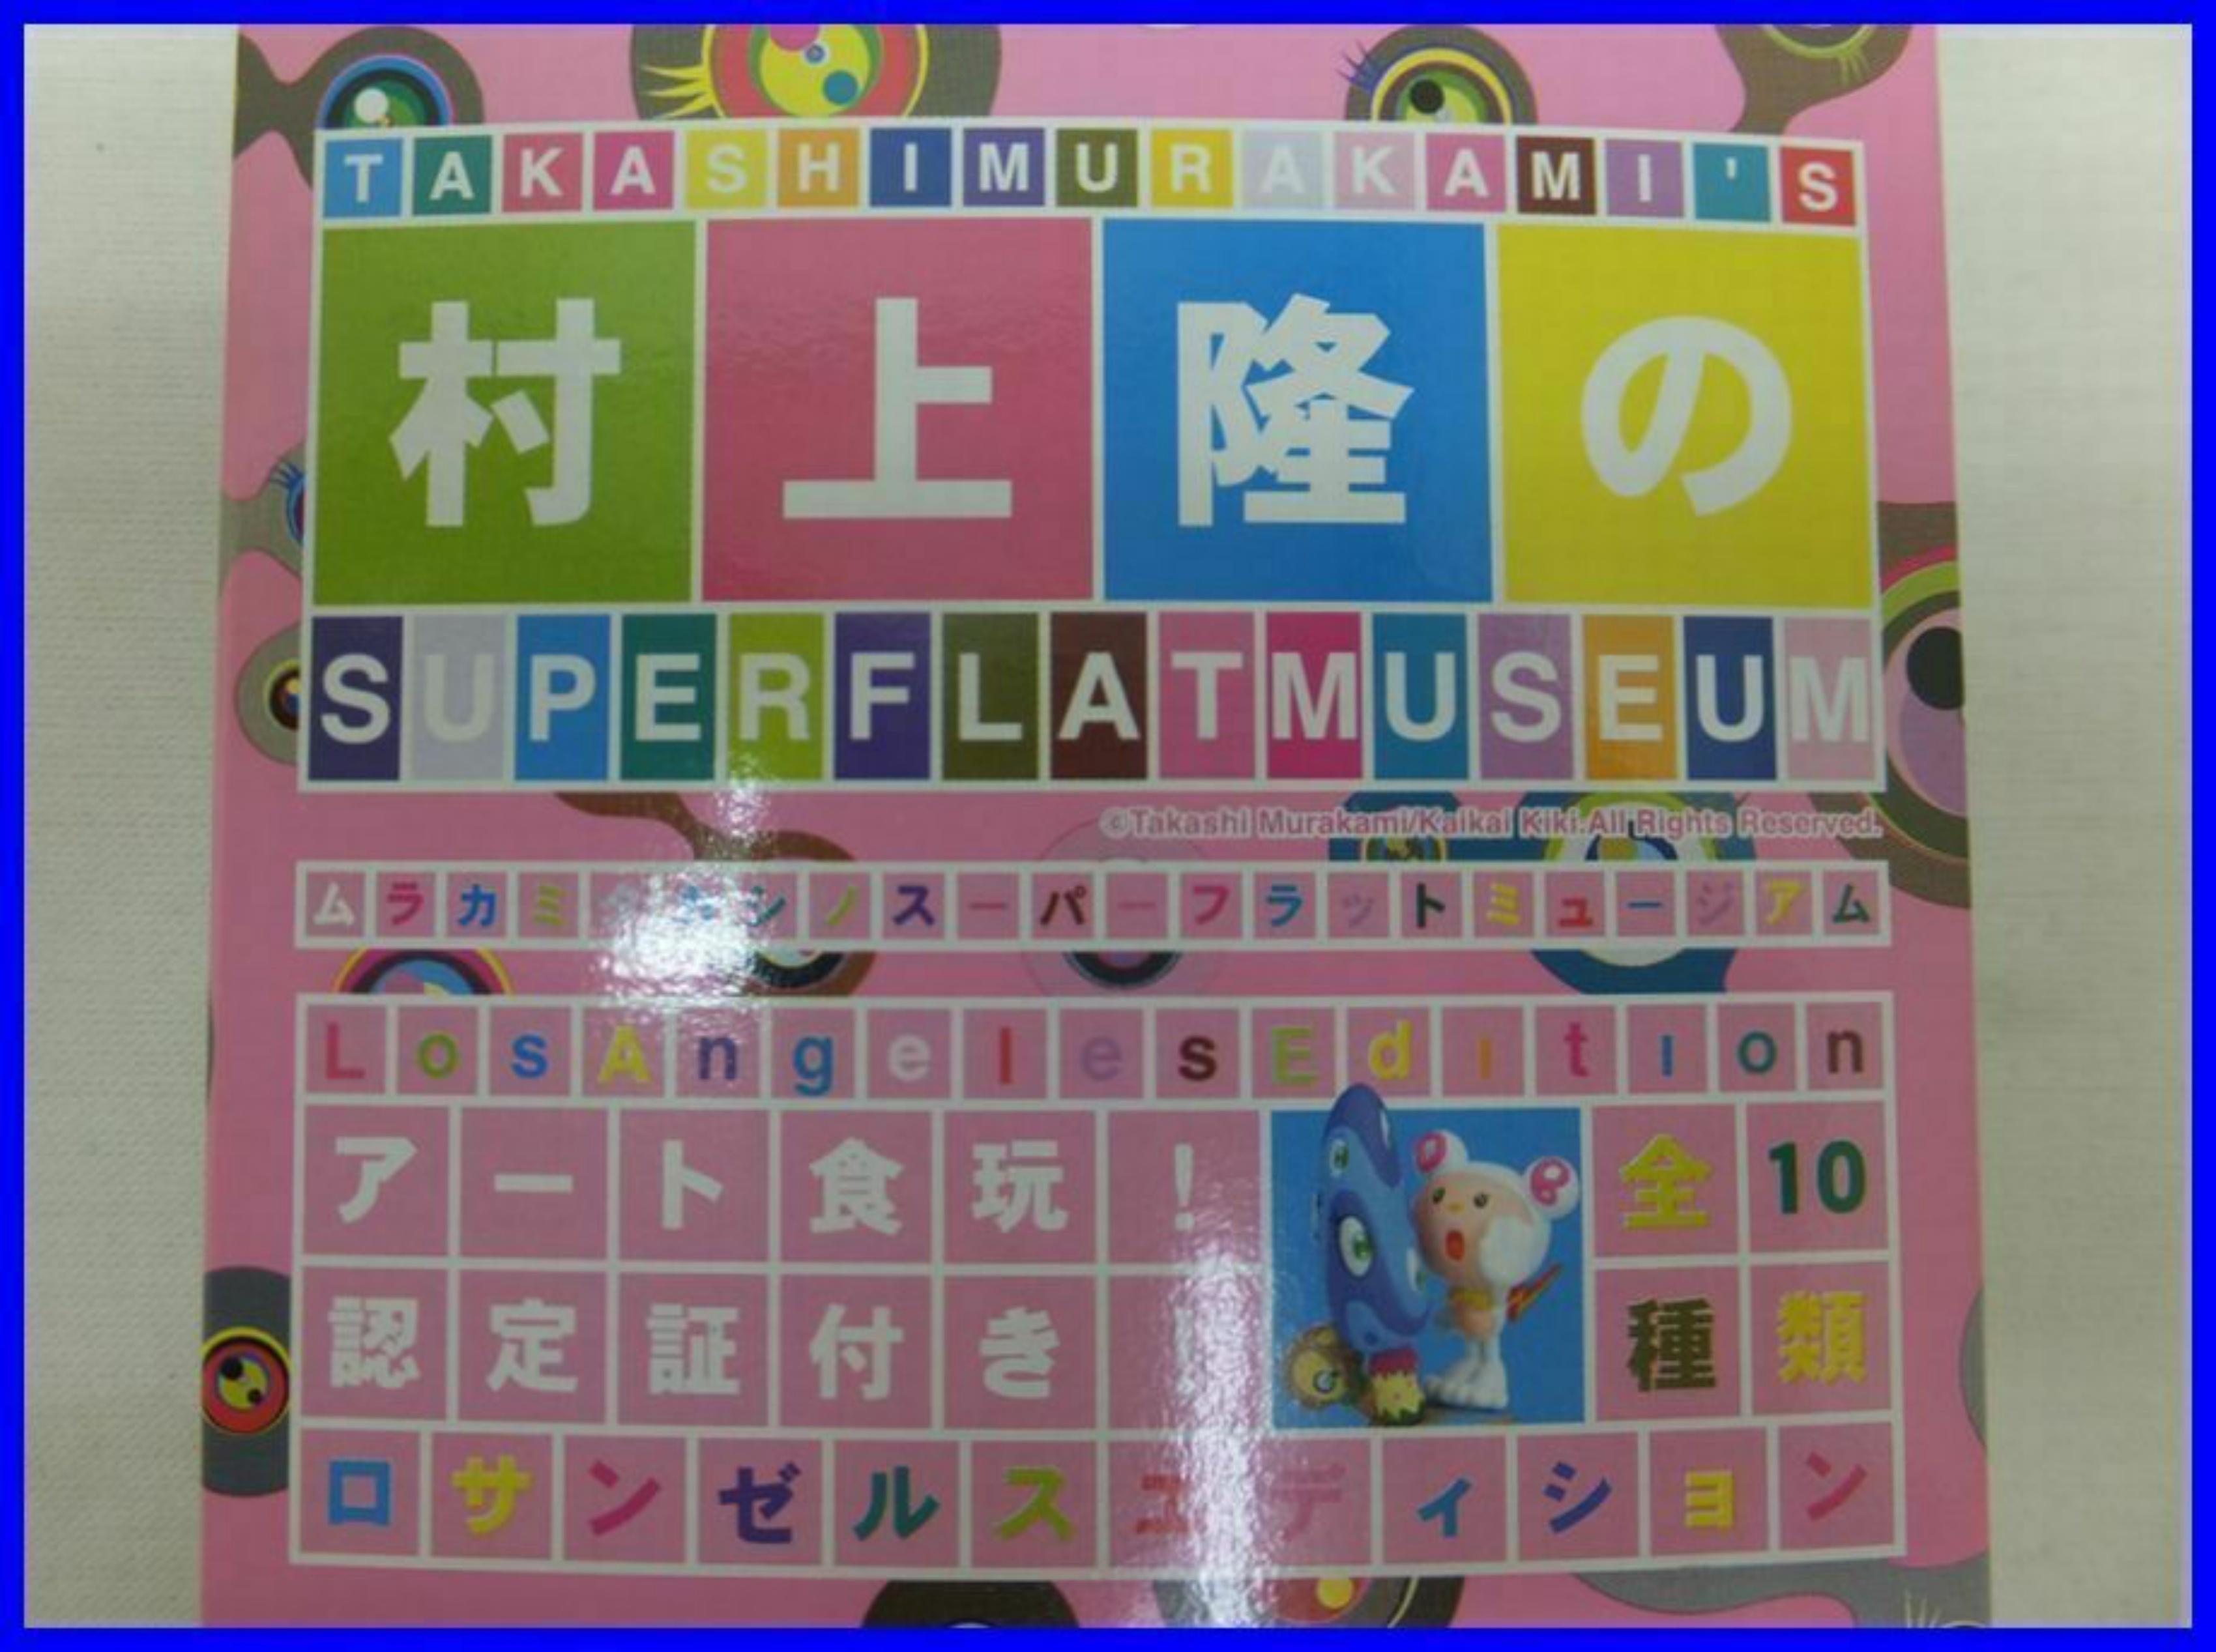 Super Flat Museum Toys (Ten Separate Works in Pink Boxes) 4